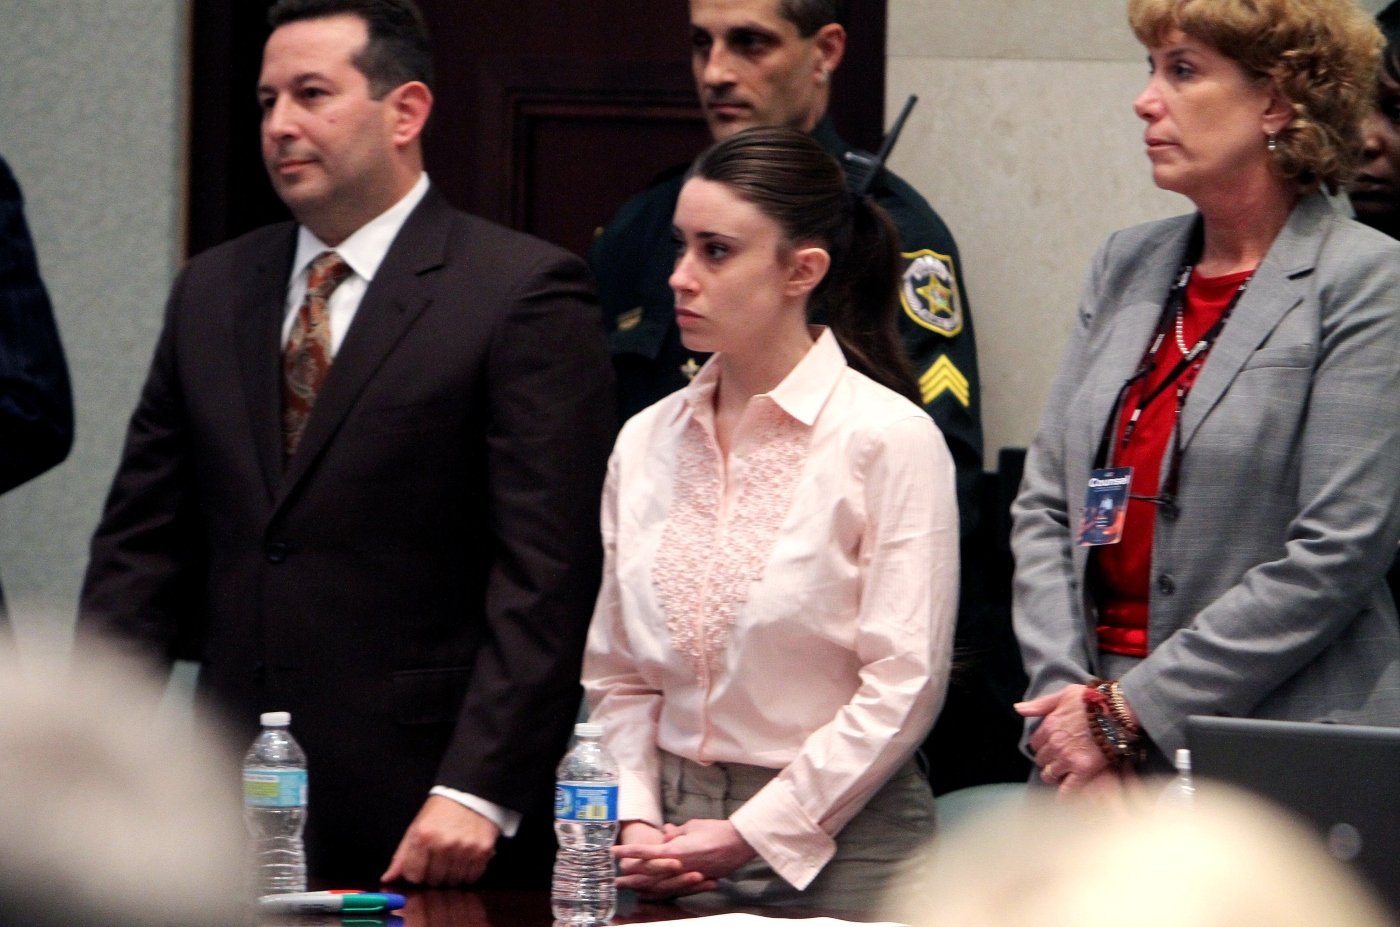 Casey Anthony, with her attorneys Jose Baez (L) and Dorothy Clay Sims (R) stand before the jury presents a verdict in her murder trial at the Orange County Courthouse on July 5, 2011 in Orlando, Florida. Casey Anthony had been accused of murdering her two-year-old daughter Caylee in 2008 and was found not guilty of manslaughter in the first degree on July 5 in Orlando, Florida.